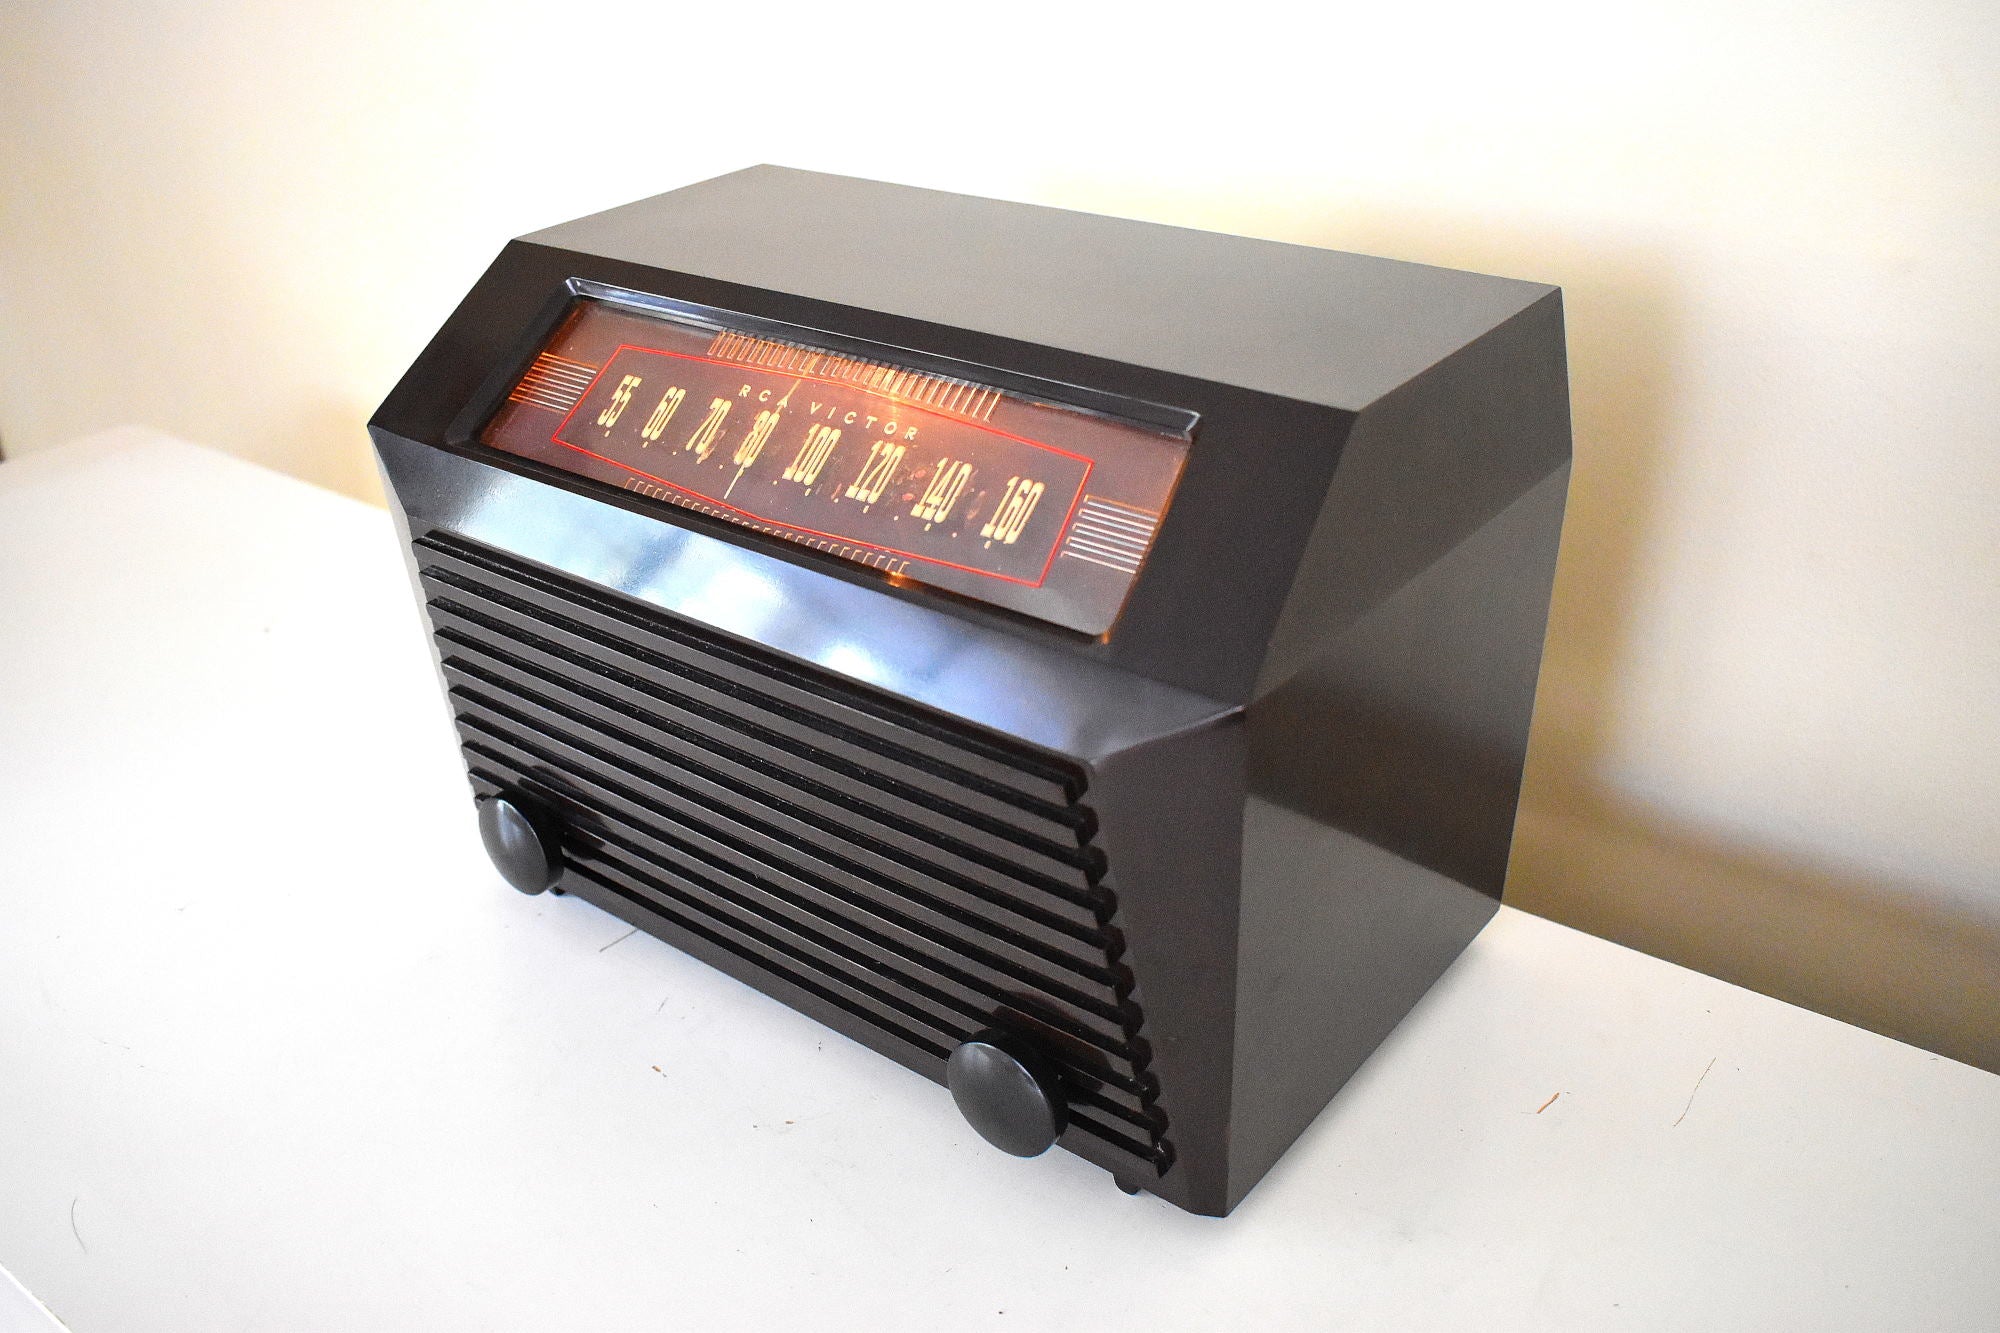 Bluetooth Ready To Go - Edgy Looking Brown Bakelite 1949 RCA Victor Model 9-X-641 Vacuum Tube AM Radio Looks Great! Sounds Wonderful!